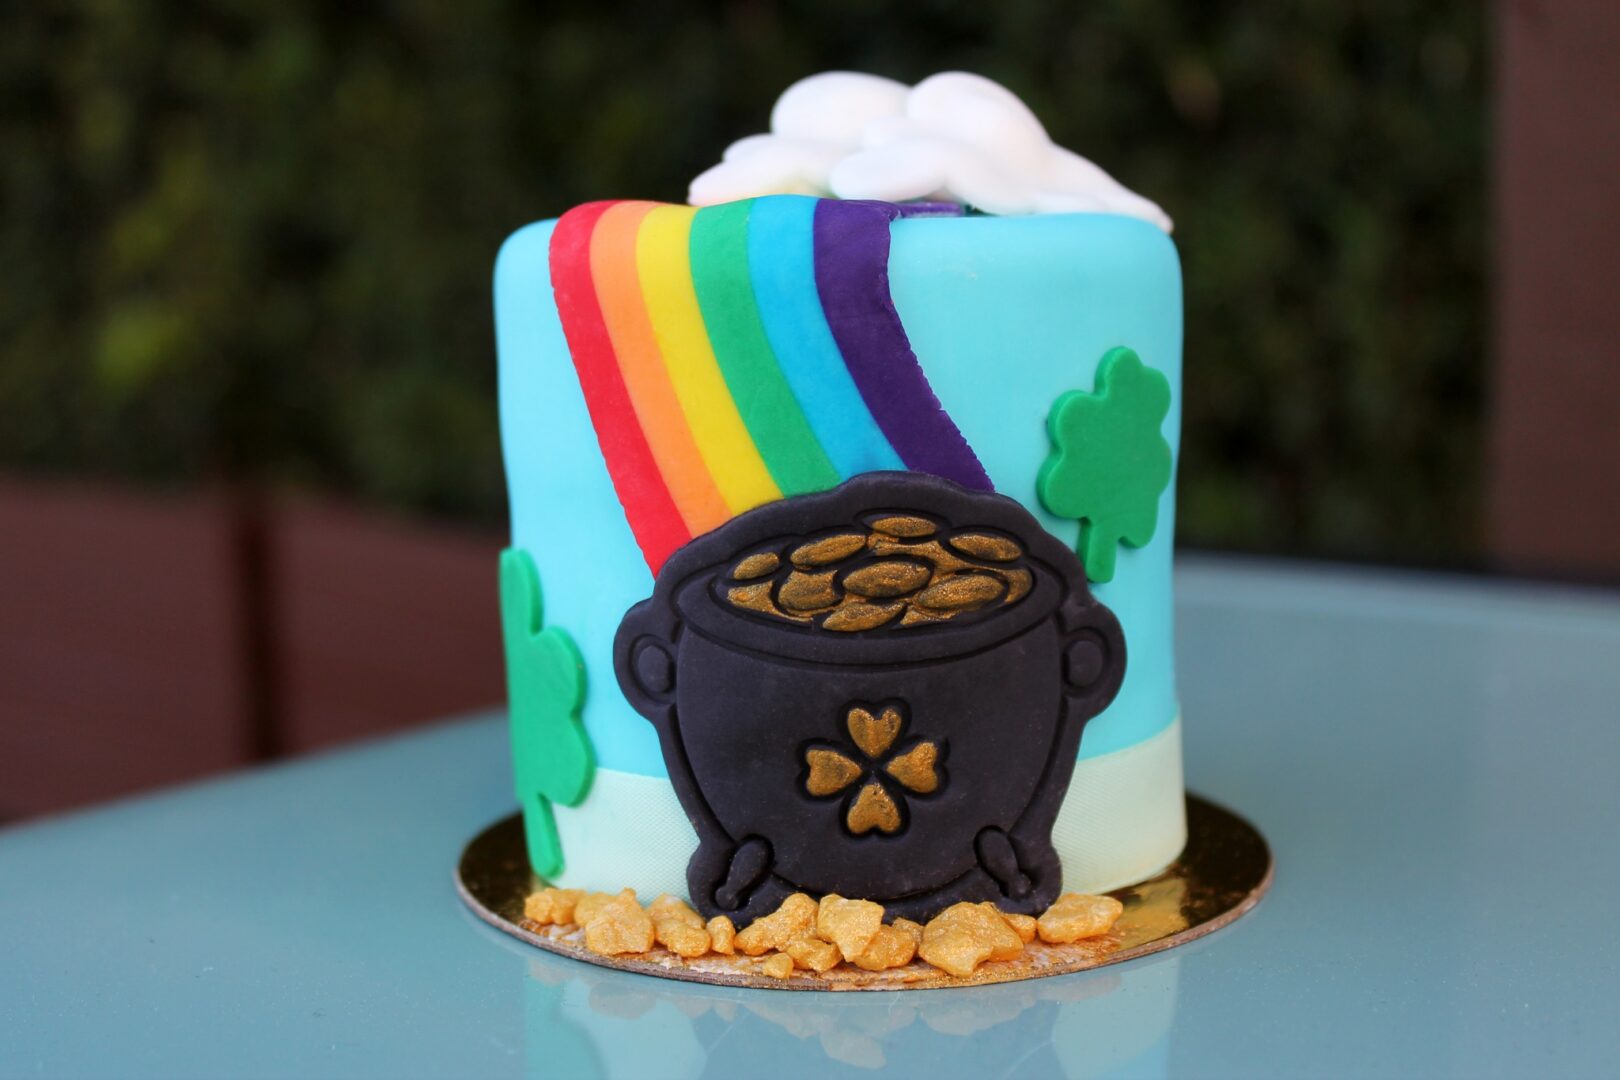 Follow the rainbow for this year’s St. Patrick’s Day Food & Drink Items at Disney Springs